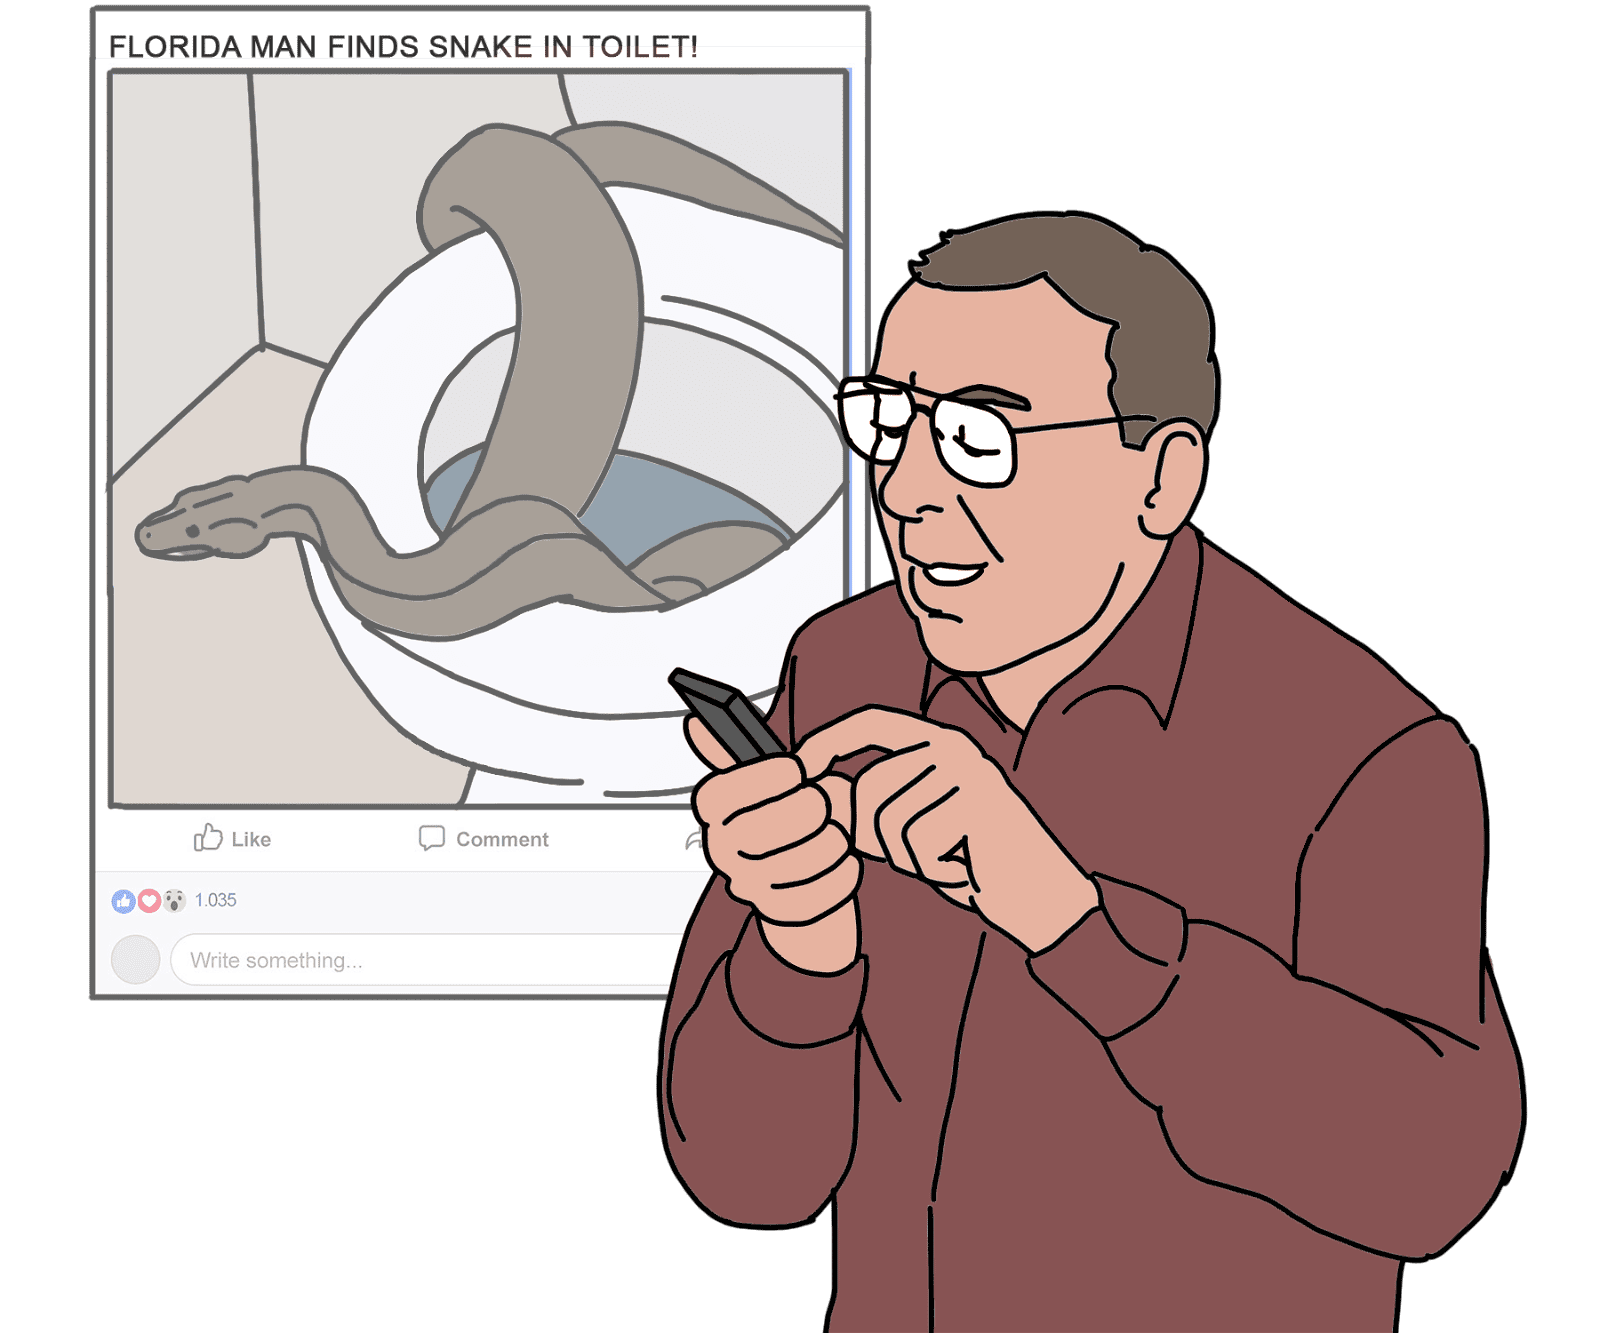 NEWS: Florida Man Finds Snake In Toilet